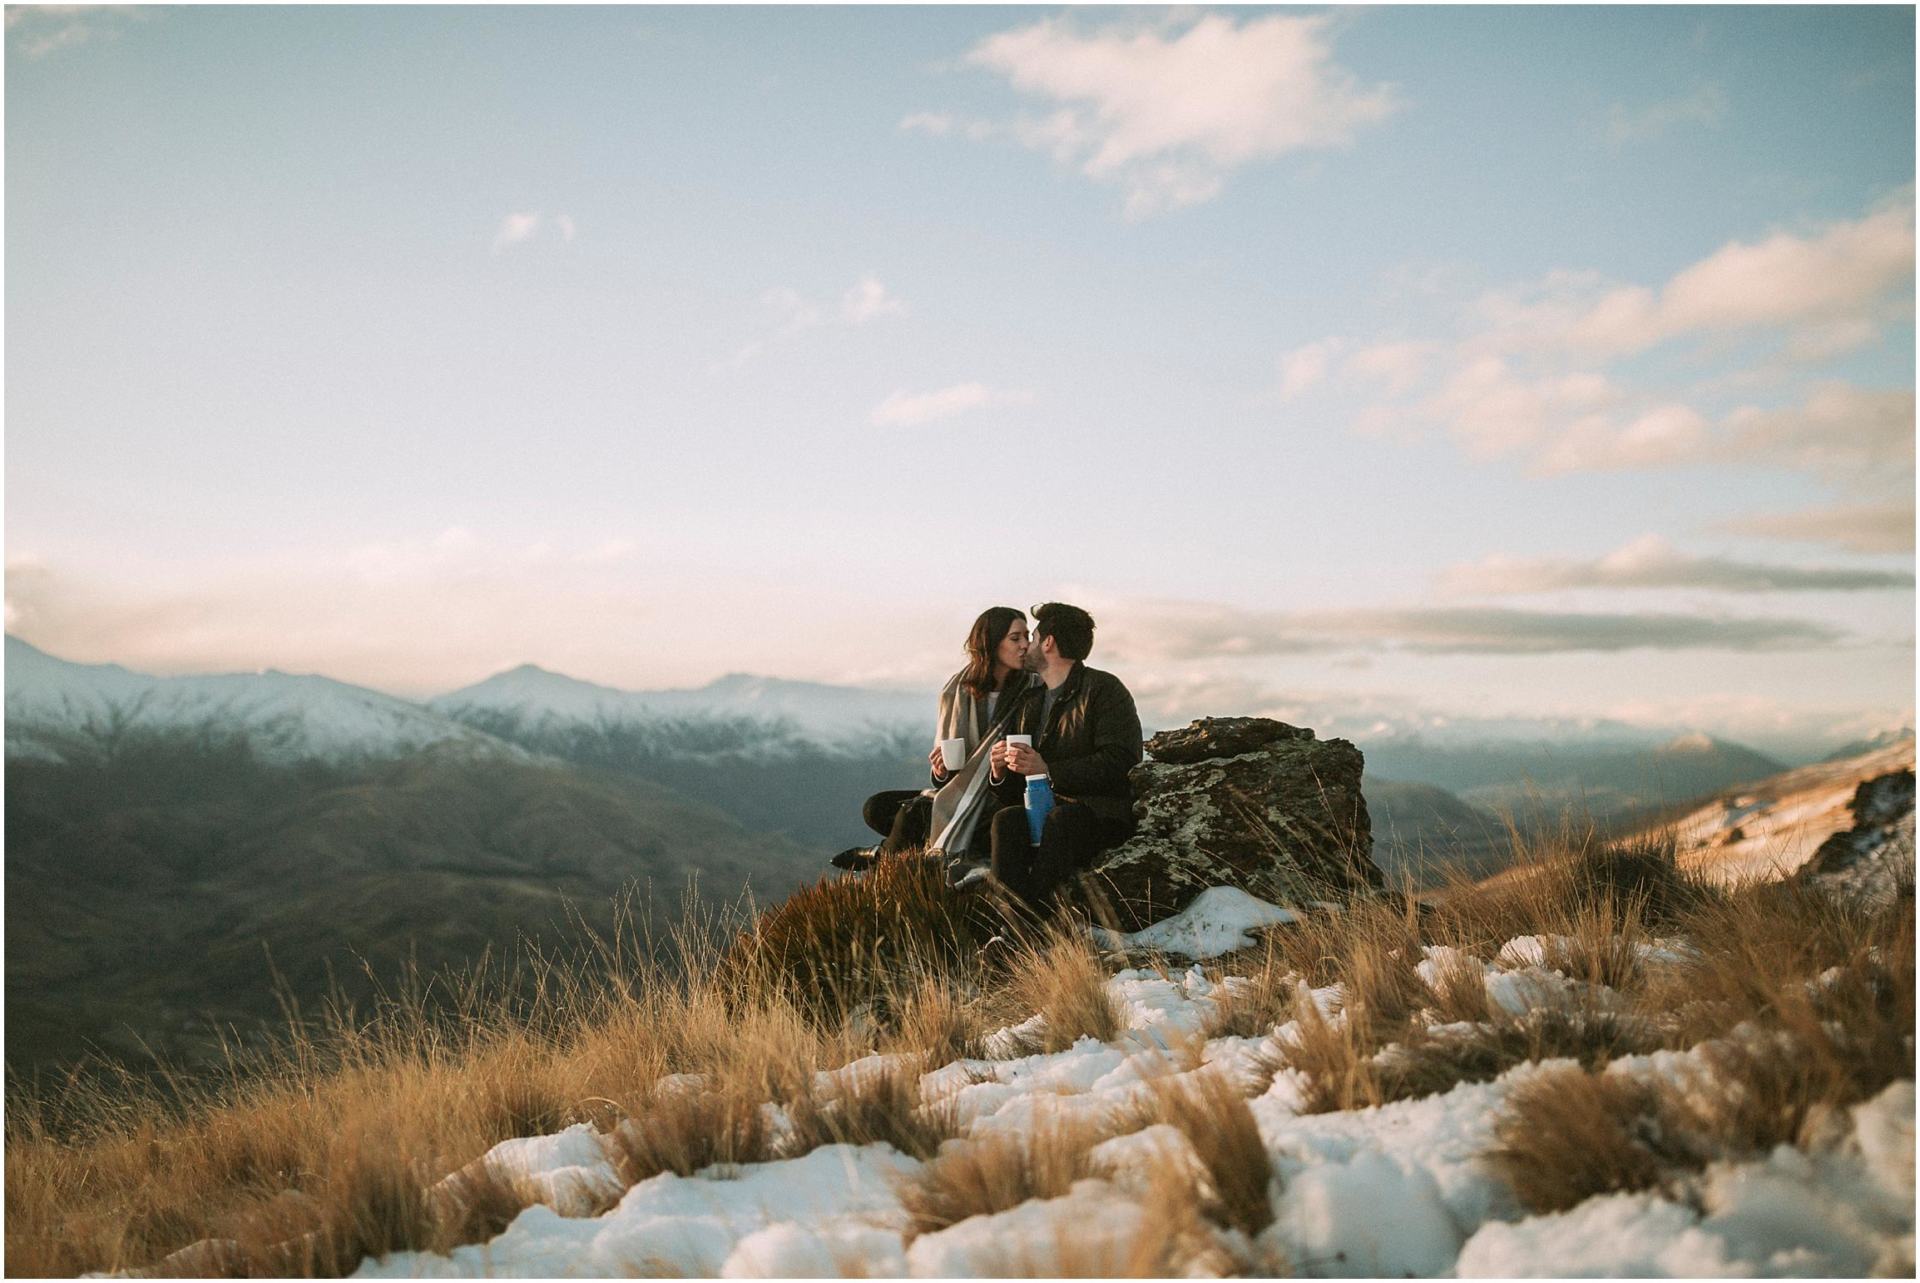 Charlotte Kiri Photography - engagement photography with a cosy couple kissing and holding their coffee, whilst sitting on a rock on the edge of a rugged mountain, amoungst the snow and tussock grass, with a backdrop of stunning snow-capped mountains behind, in Wanaka, New Zealand